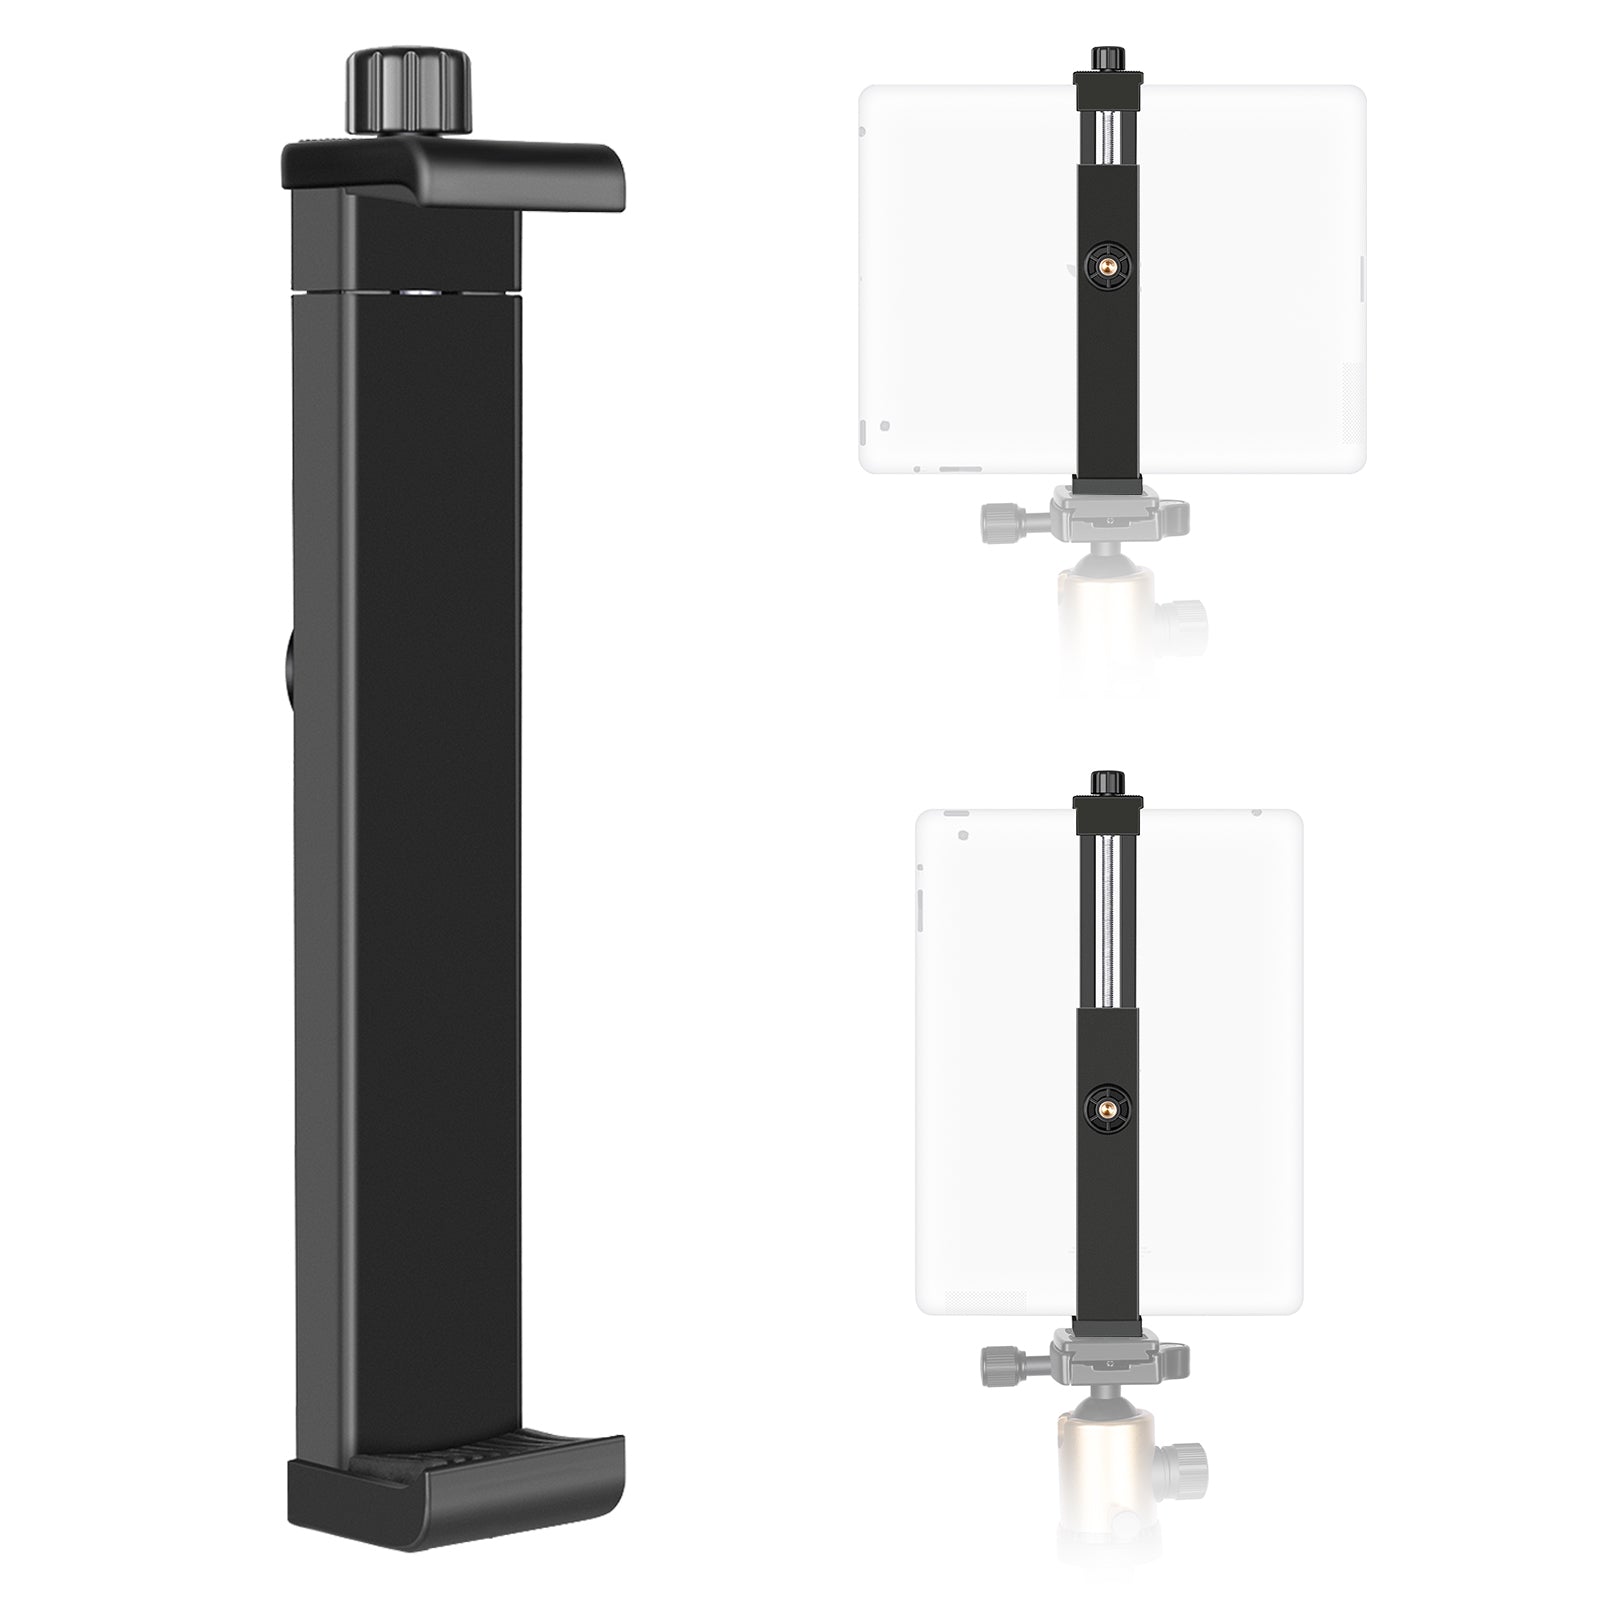 Neewer iPad Tablet Mount Holder, 6.3-9.25 inches for iPad Air Pro